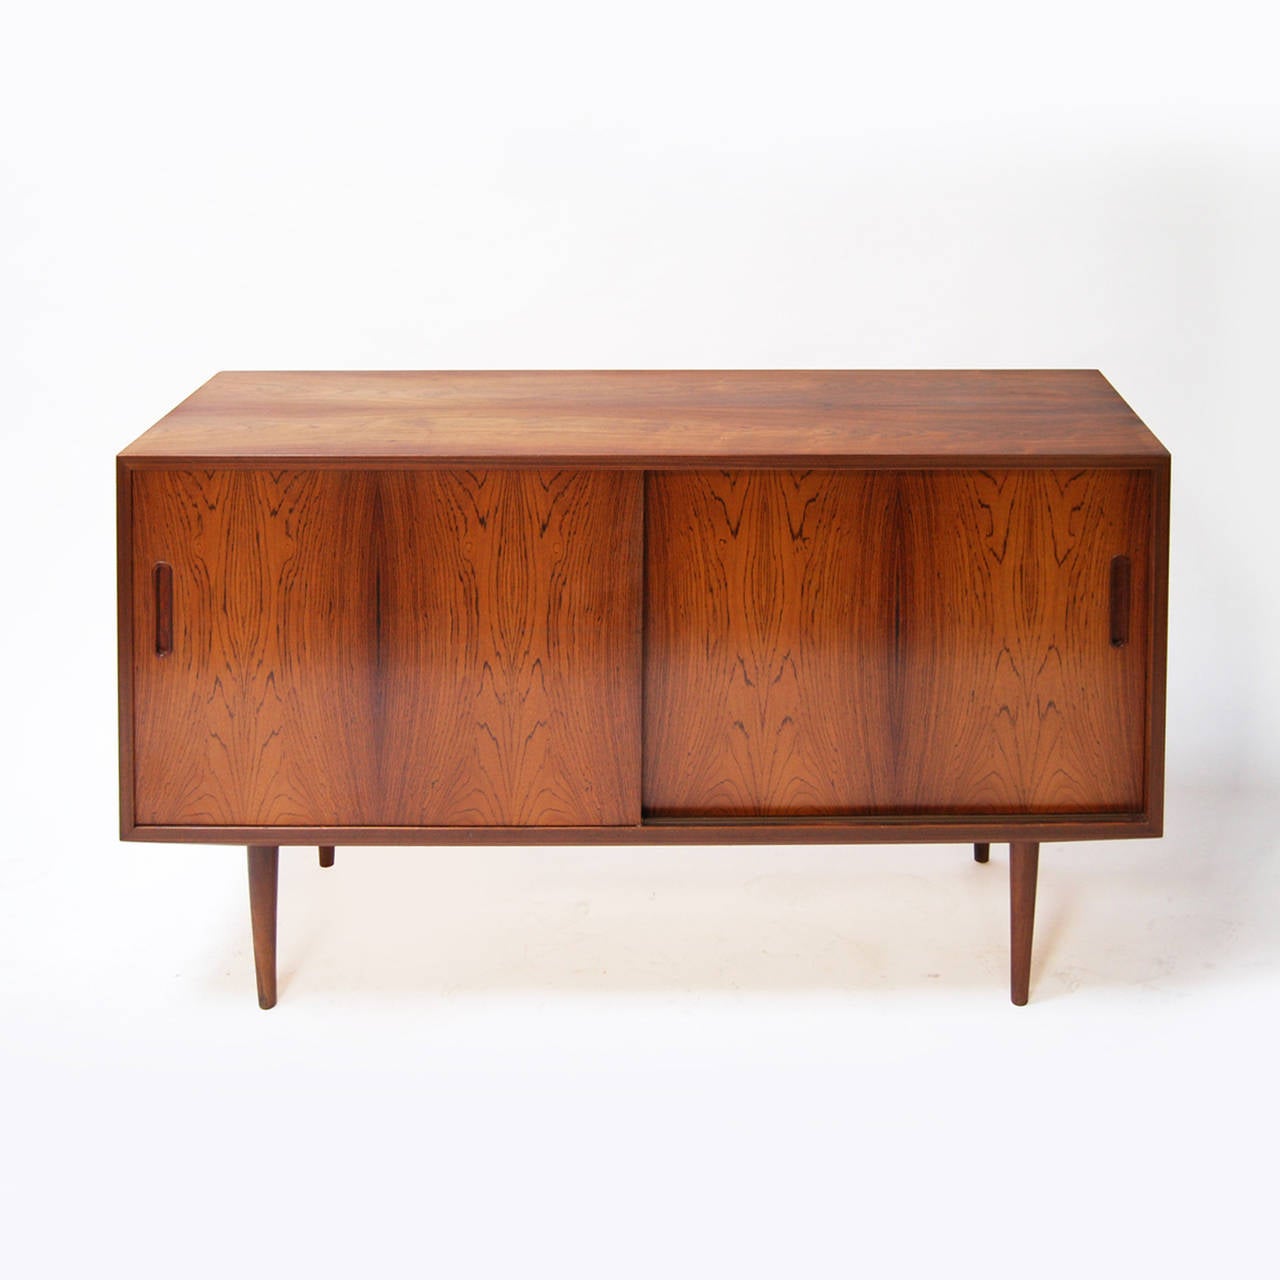 Small Danish dresser, with sliding doors, two shelves and a drawer.

With a small footprint it is an ideal piece for small space.

Made in Denmark, 1950s.